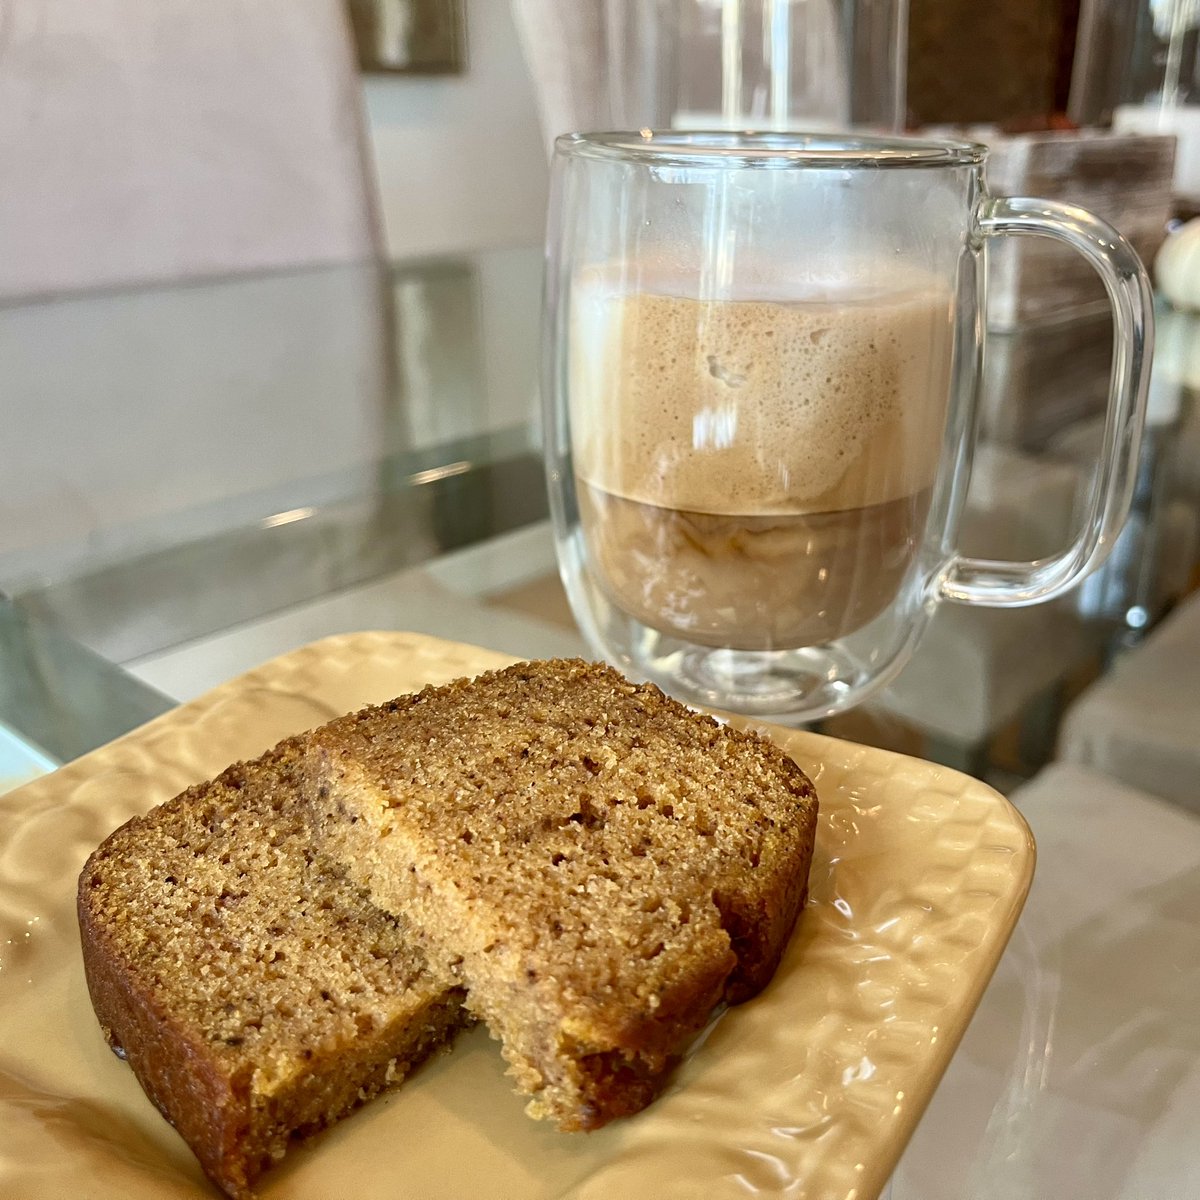 Cappuccino. Pumpkin bread.   💕😋 #perfectsnack #Philly #foodie